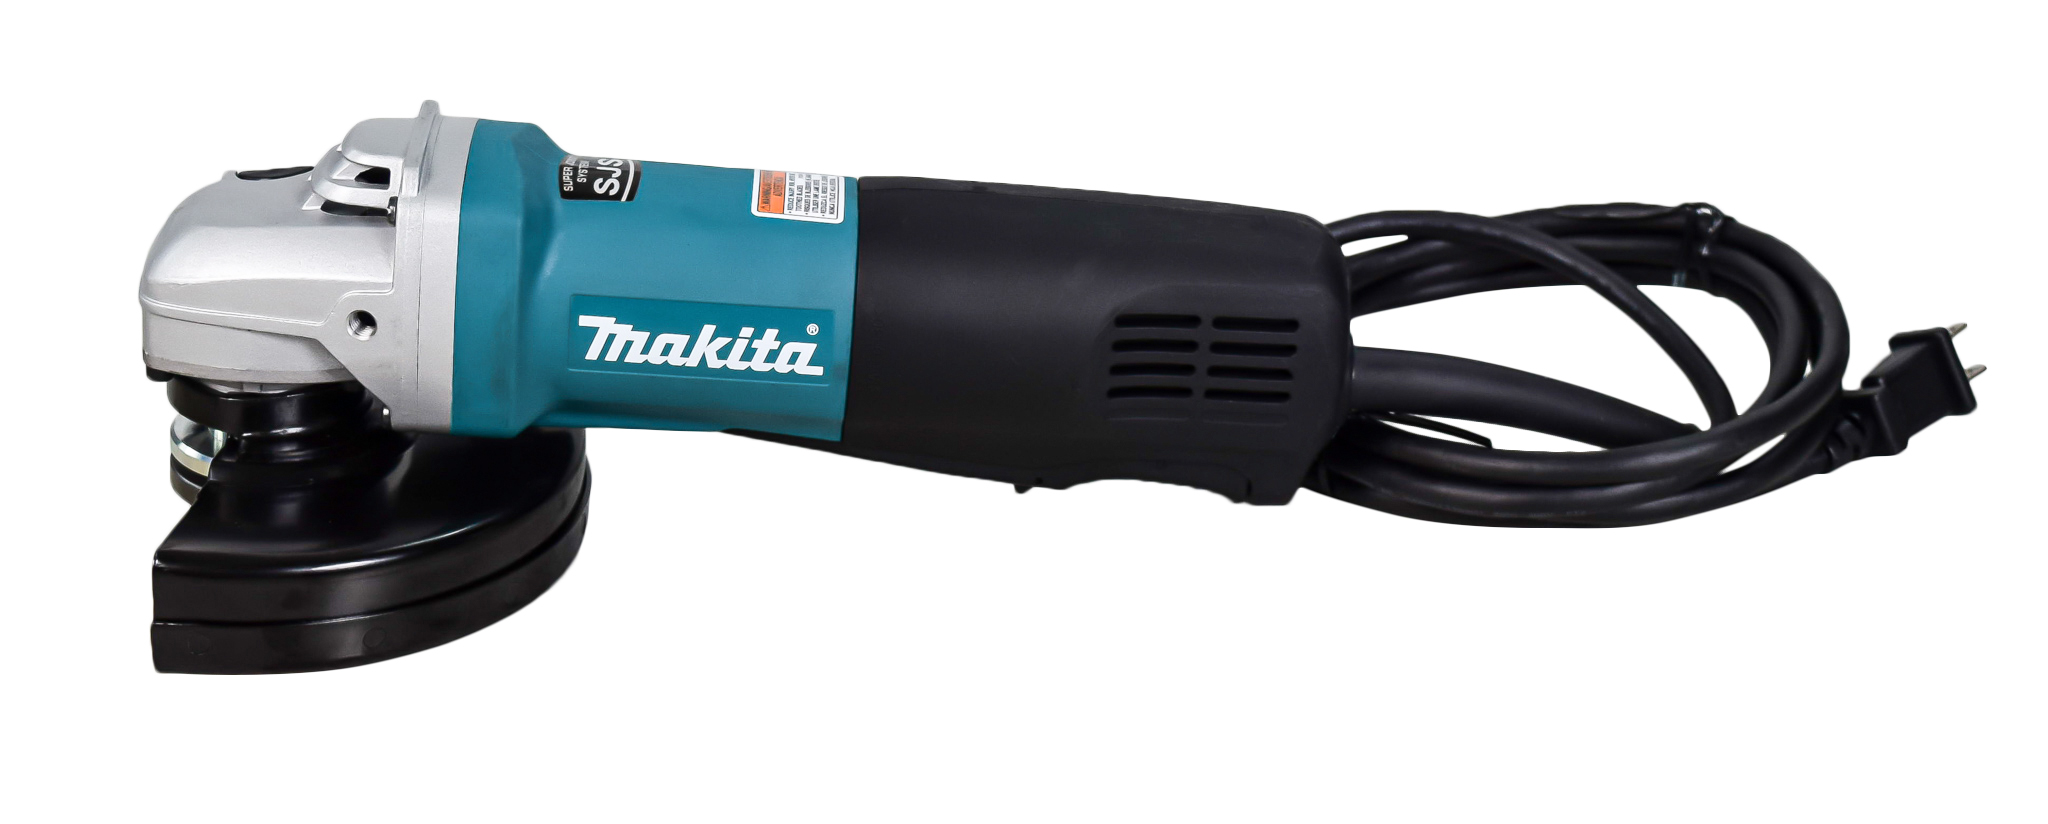 Makita 13 Amp in. SJS High-Power Paddle Switch Cut-Off/Angle Grinder  9566PCX1